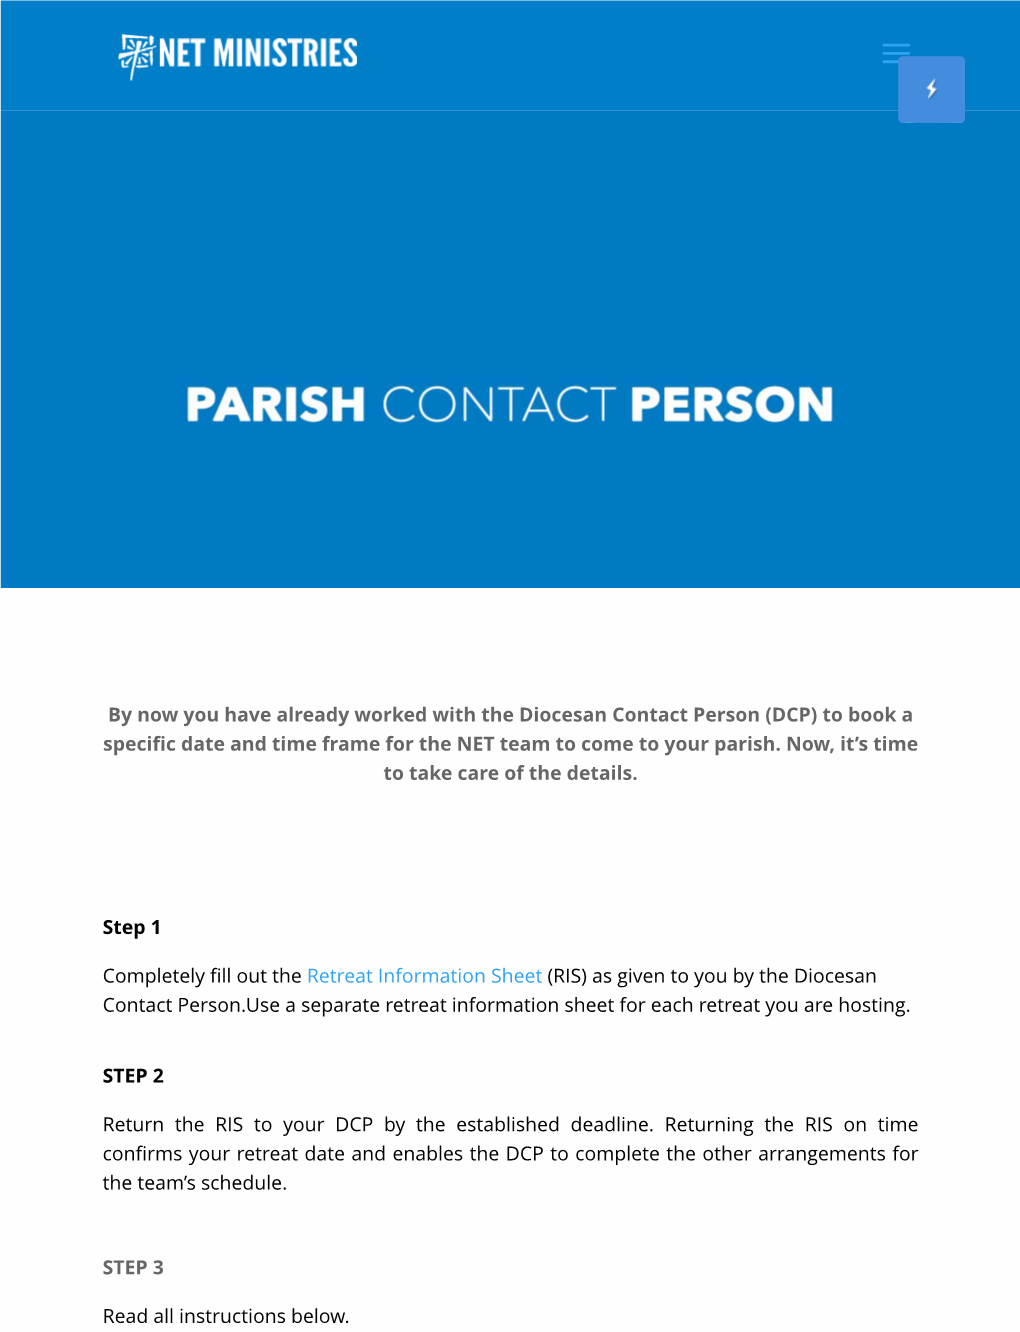 By Now You Have Already Worked with the Diocesan Contact Person (DCP) to Book a Speciﬁc Date and Time Frame for the NET Team to Come to Your Parish